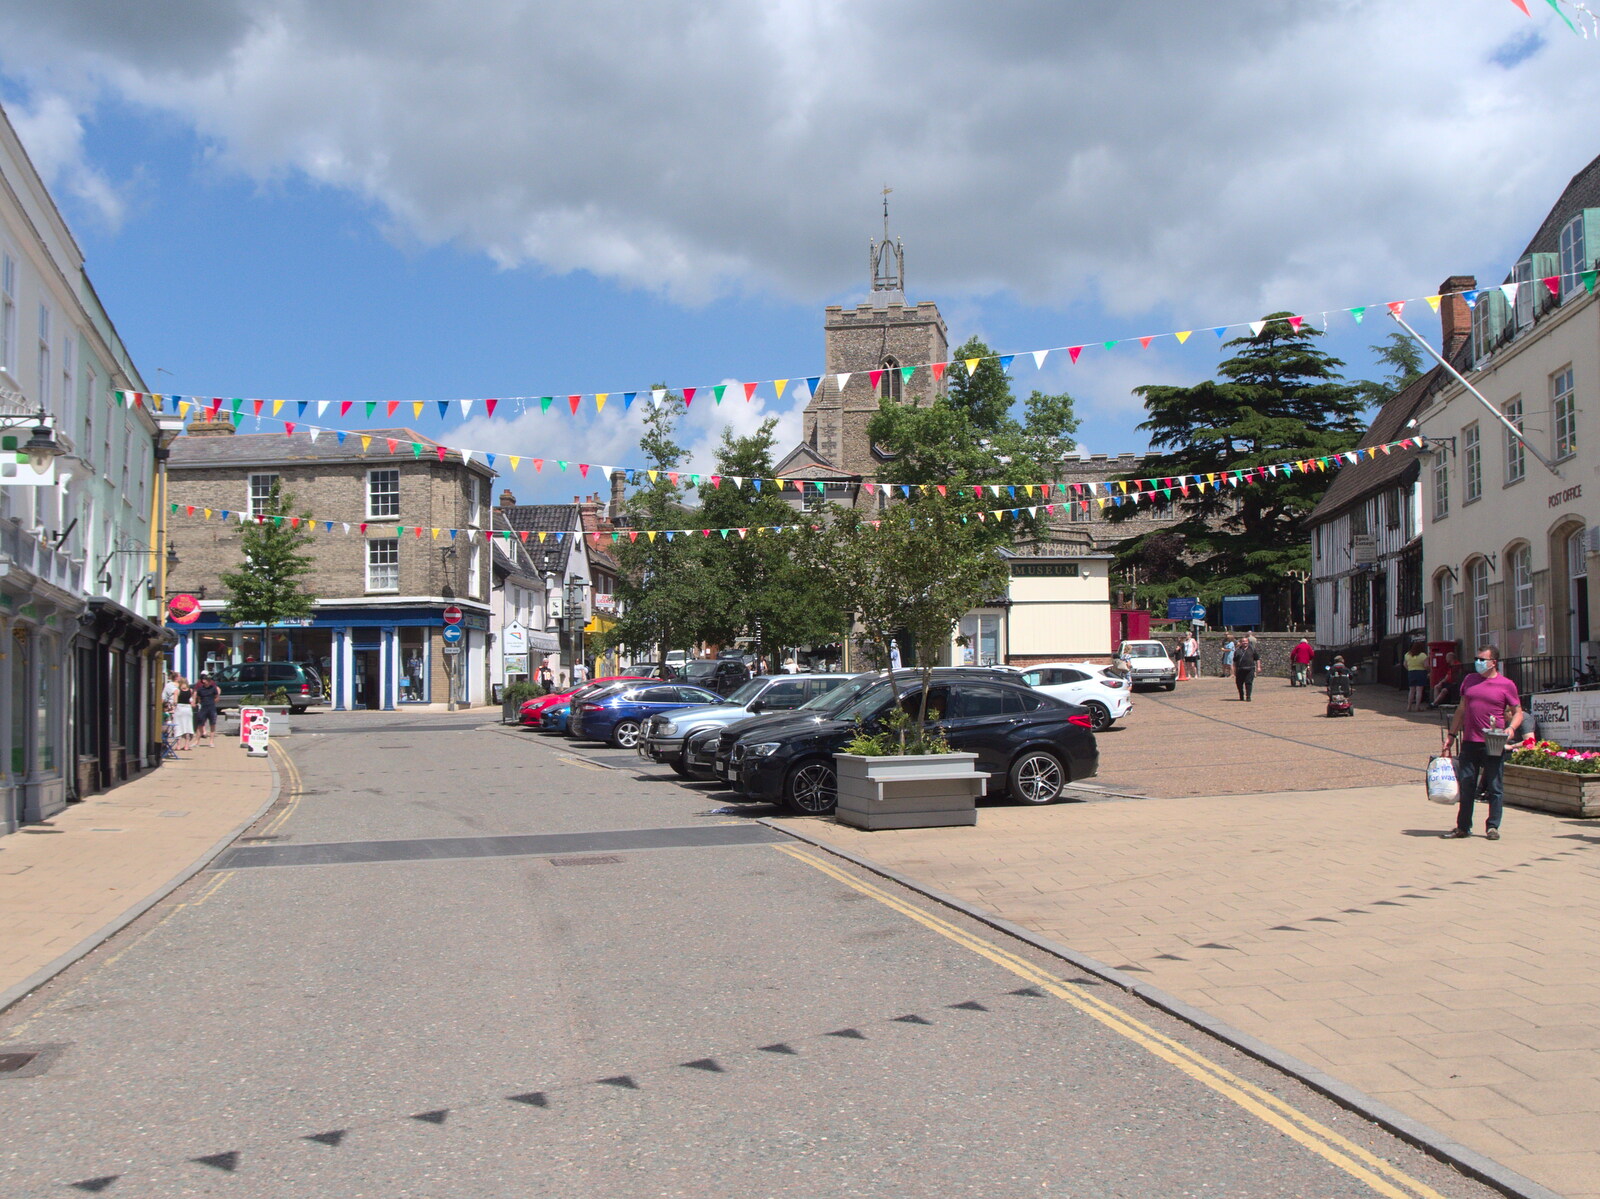 The market place is almost deserted from A Visit to the Kittens, Scarning, Norfolk - 13th June 2021